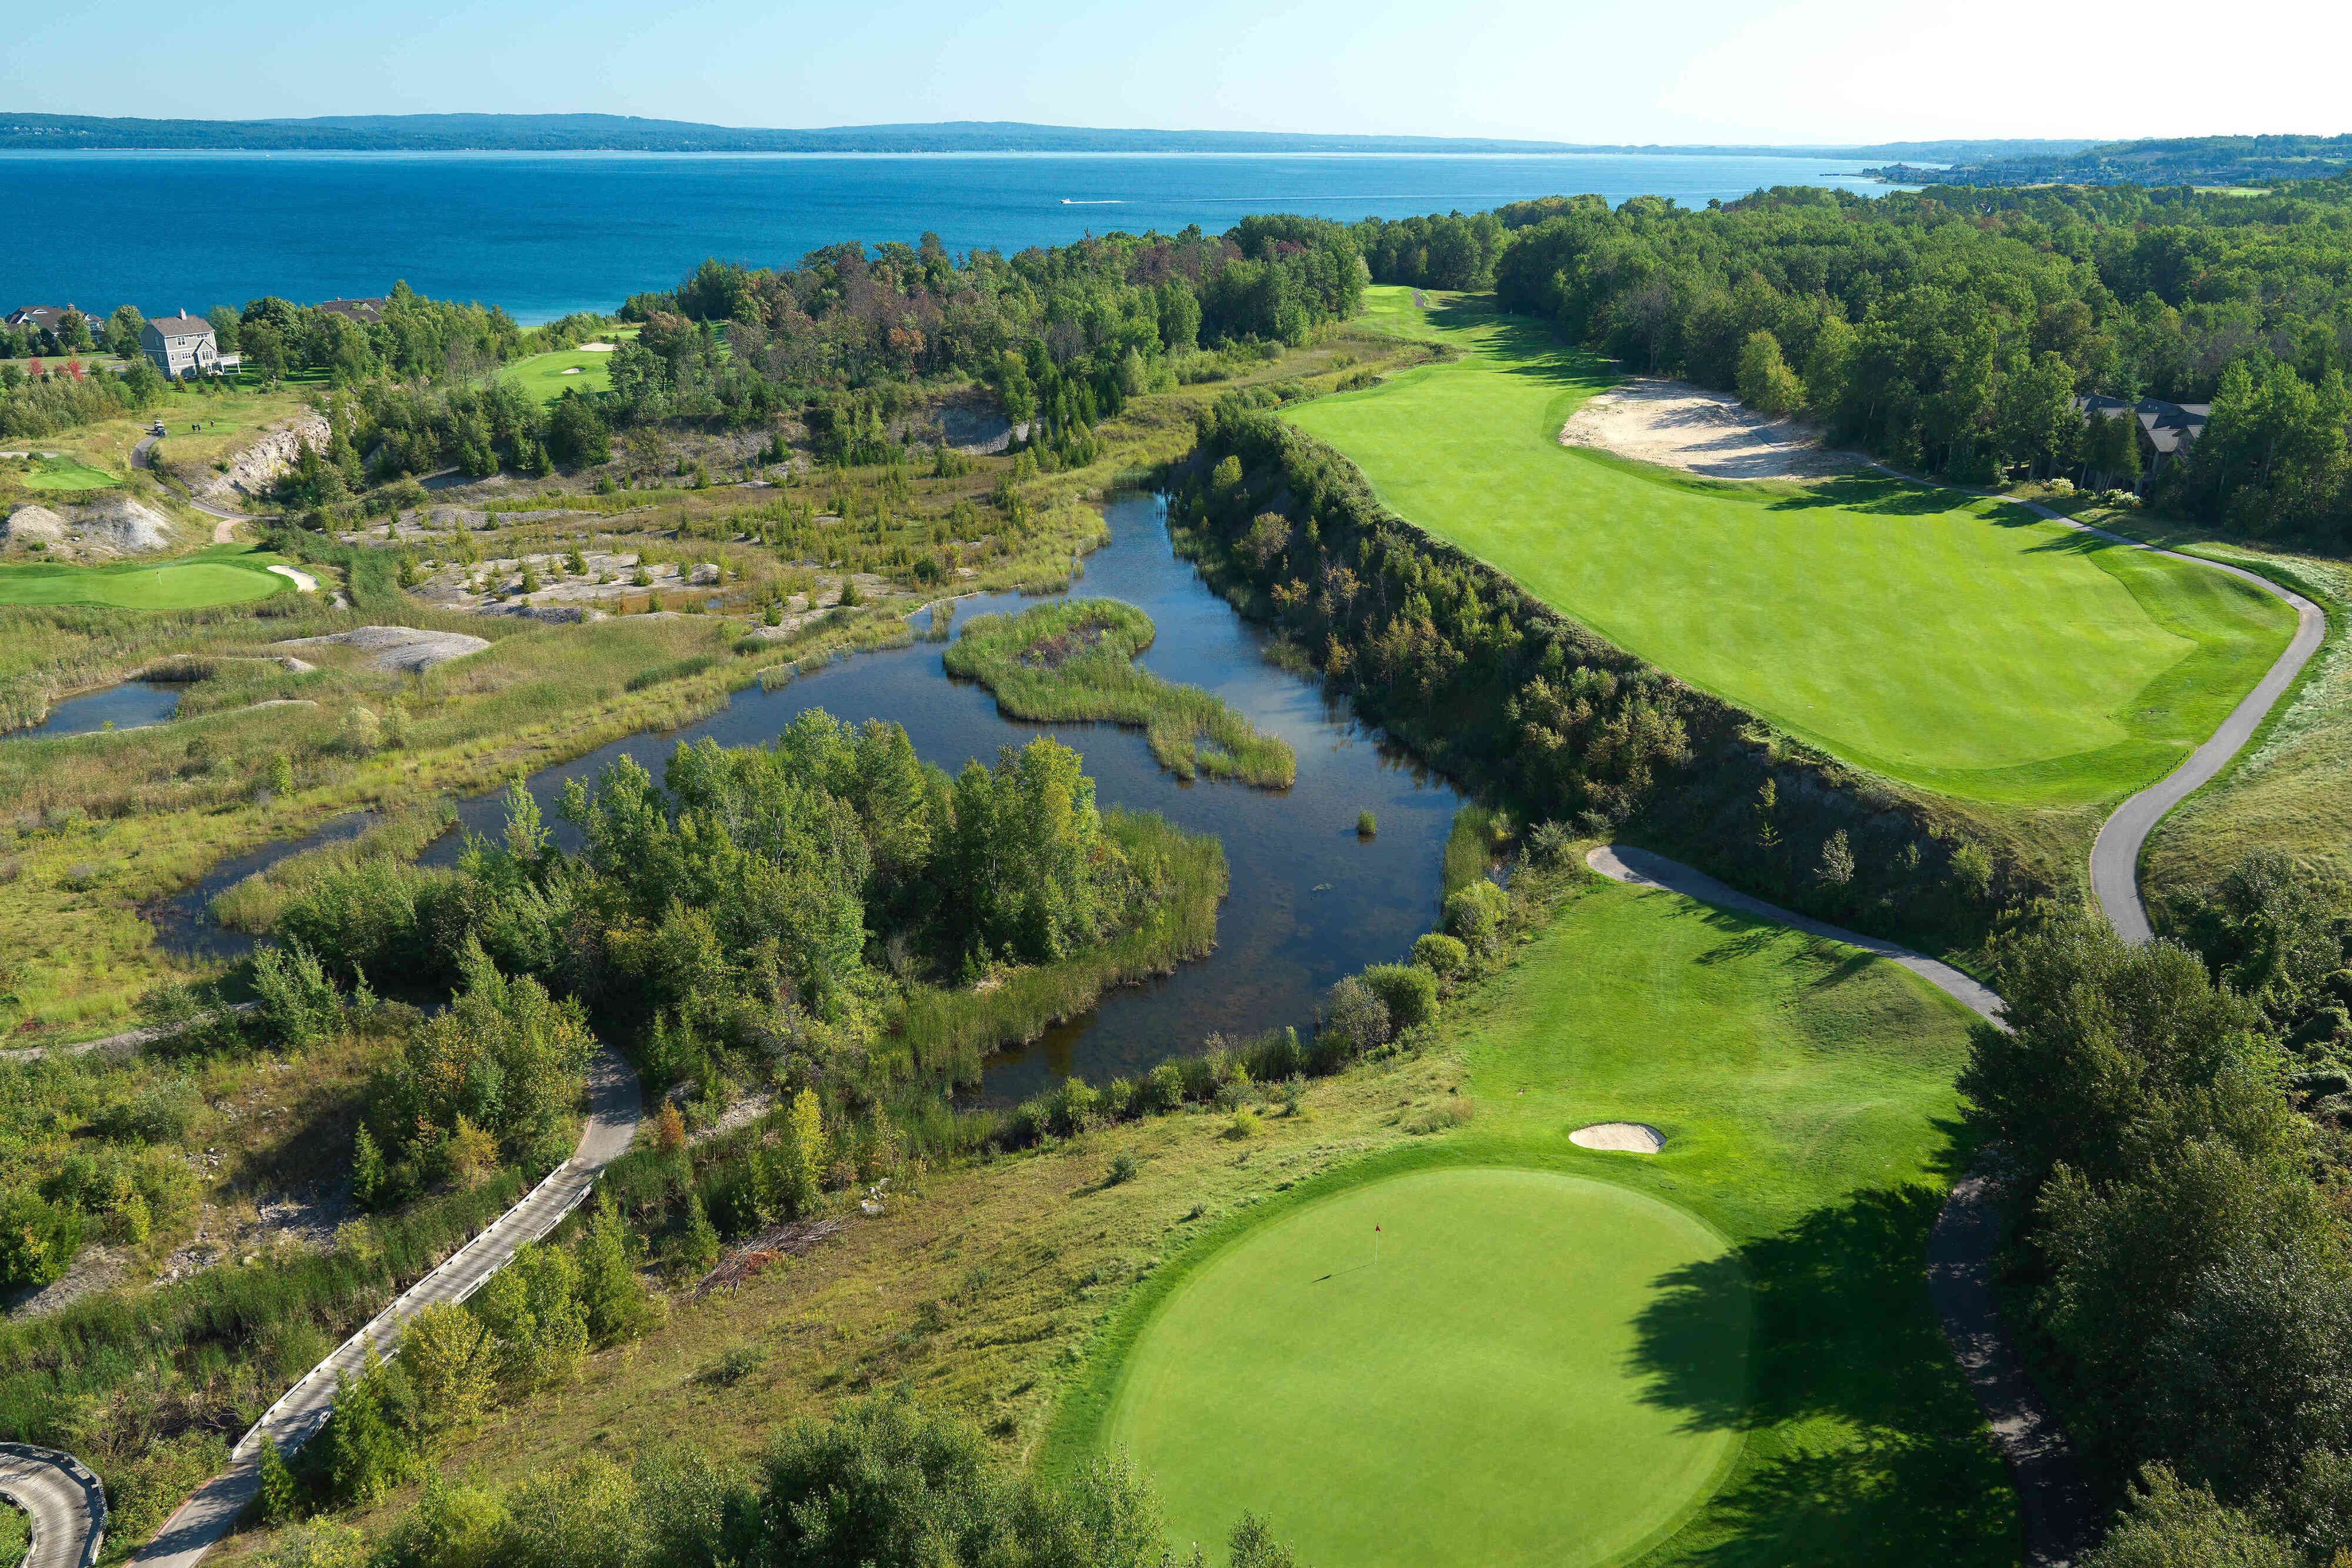 The Quarry course at Bay Harbor Golf Club